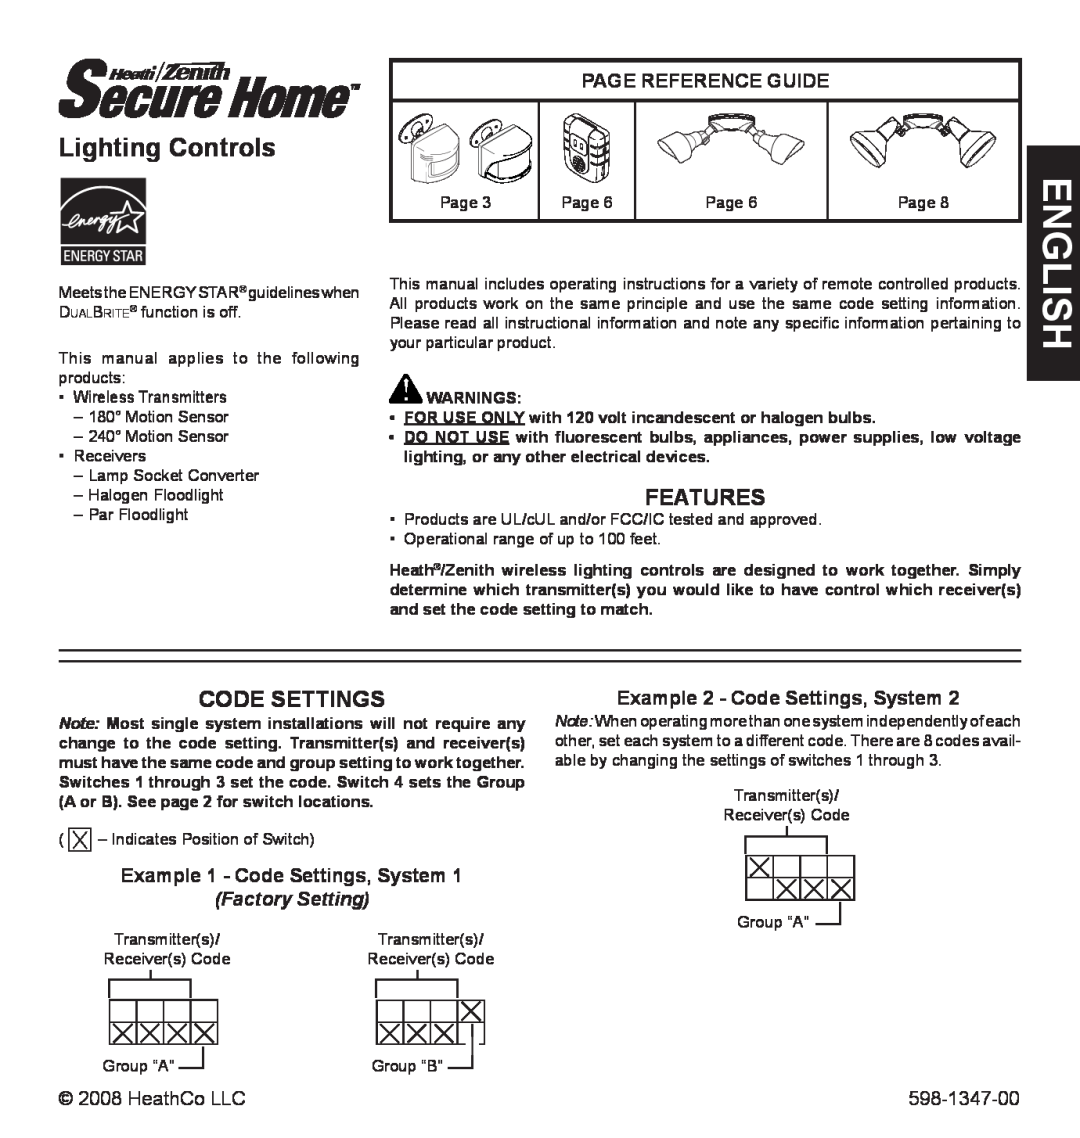 Heath Zenith 598-1347-00 operating instructions English, Lighting Controls, Features, Code Settings, Page Reference Guide 